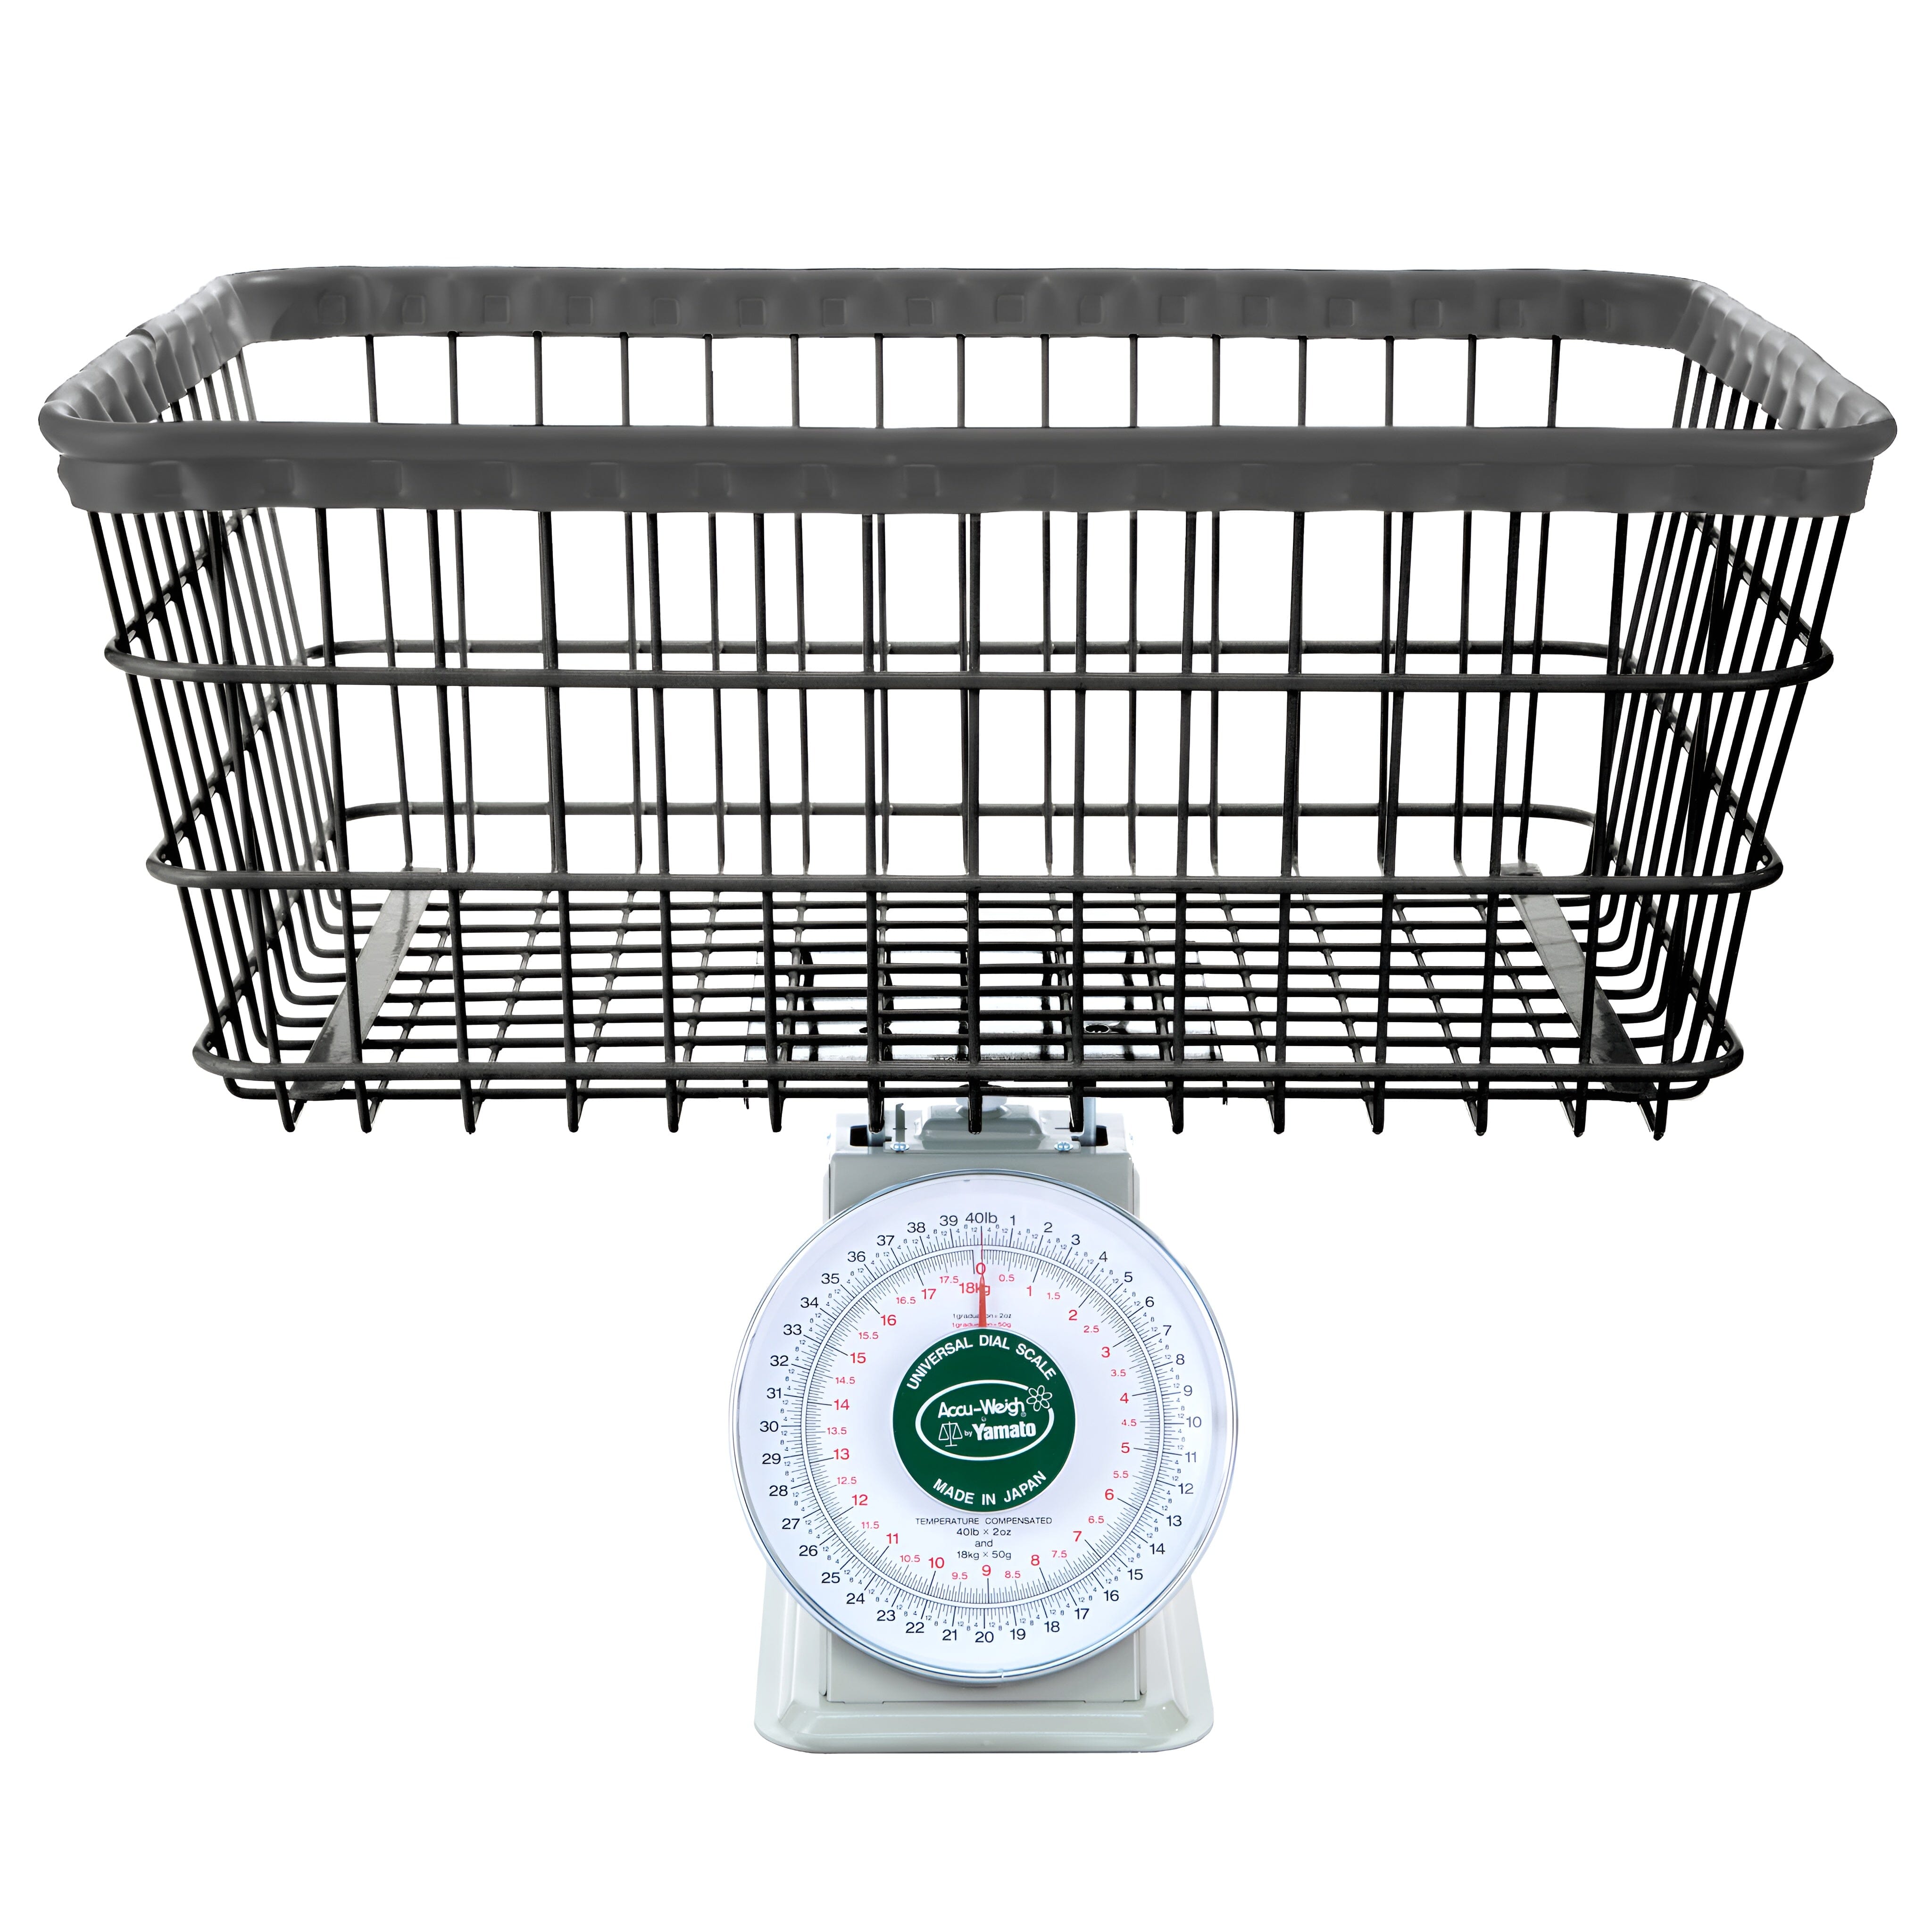 Coin-Op Laundry Scale 40 Lb. Capacity